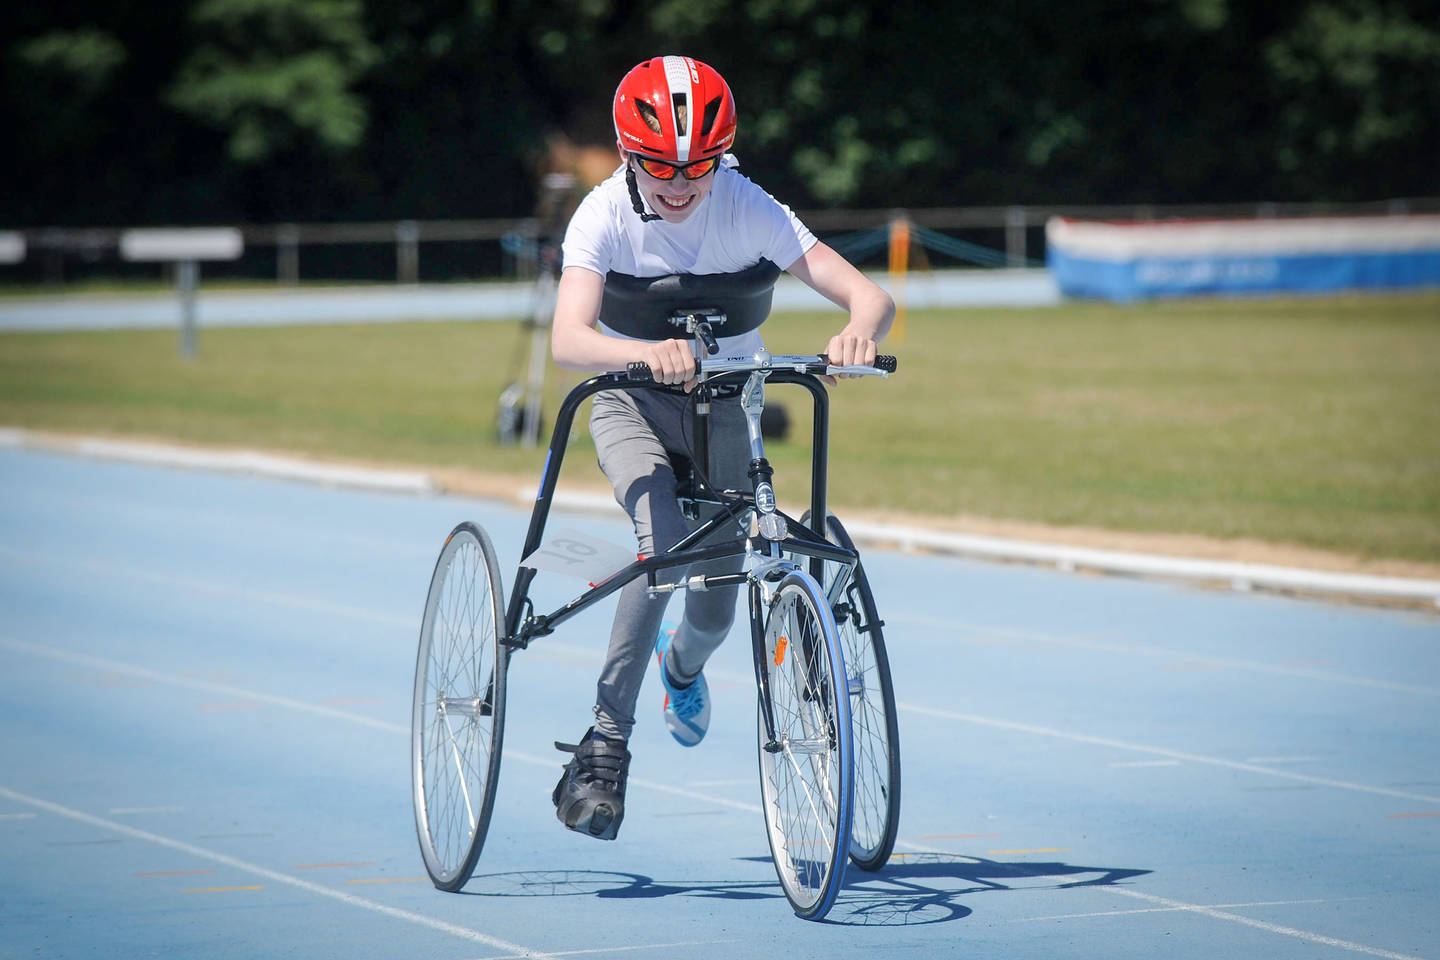 Thomas Talbot competing in RaceRunning event